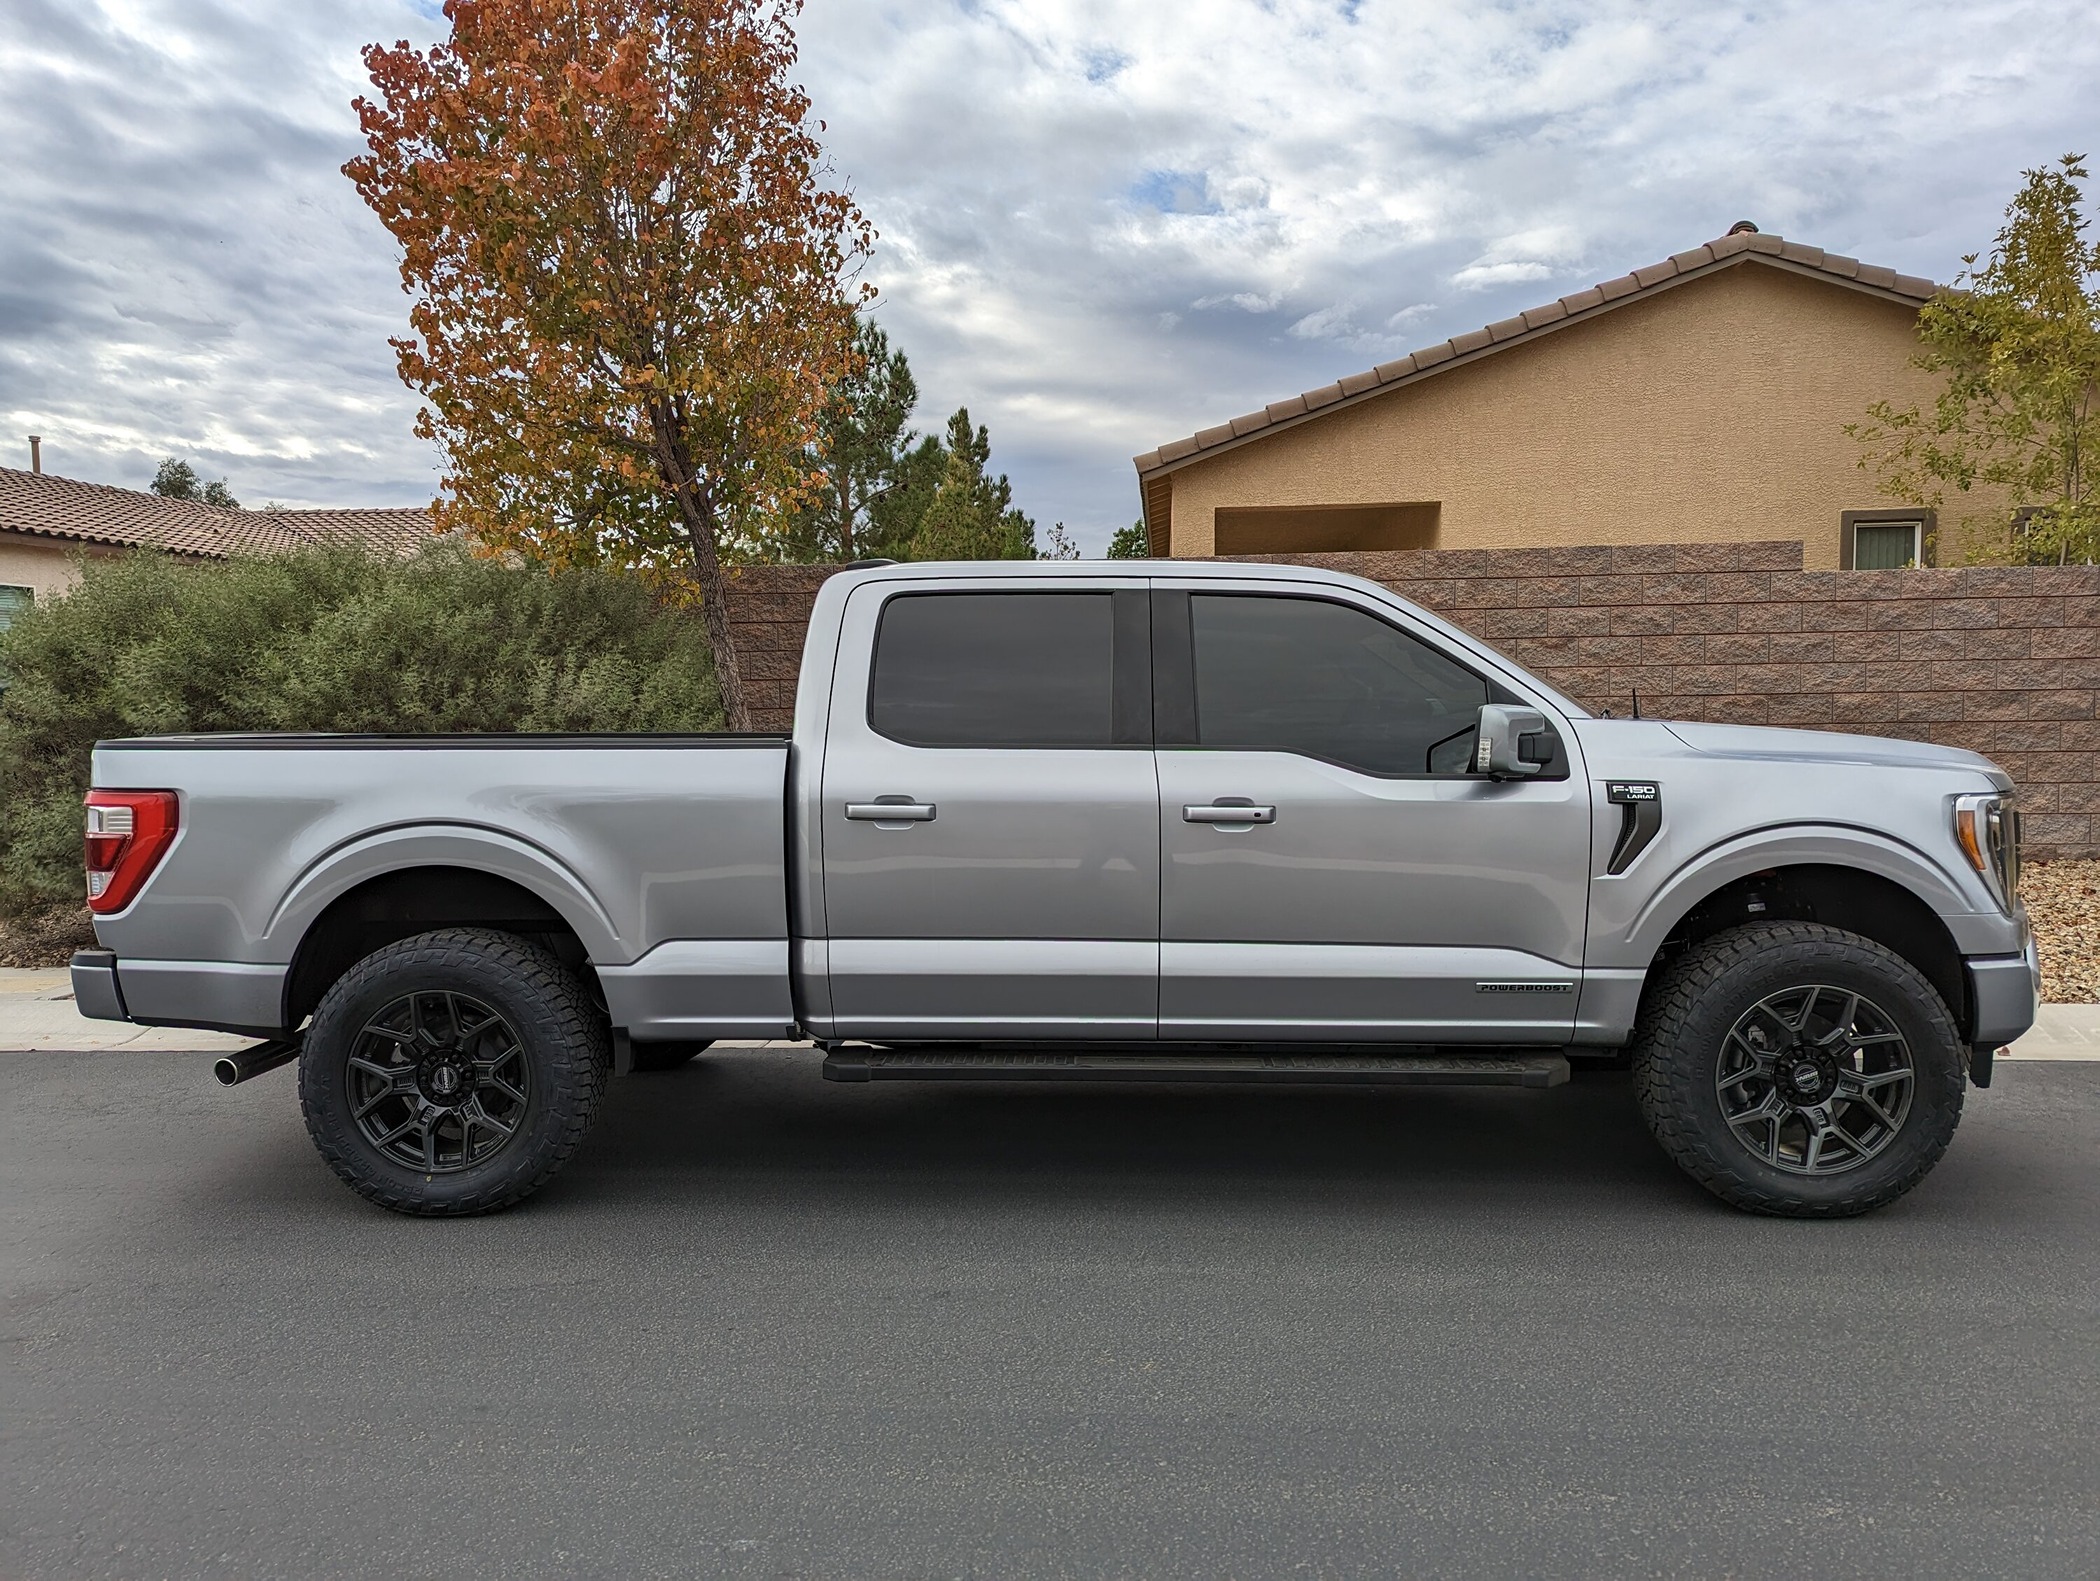 Ford F-150 Leveled or Lifted "Long Bed" 157" Wheel Base Photo Thread PXL_20221108_160909674